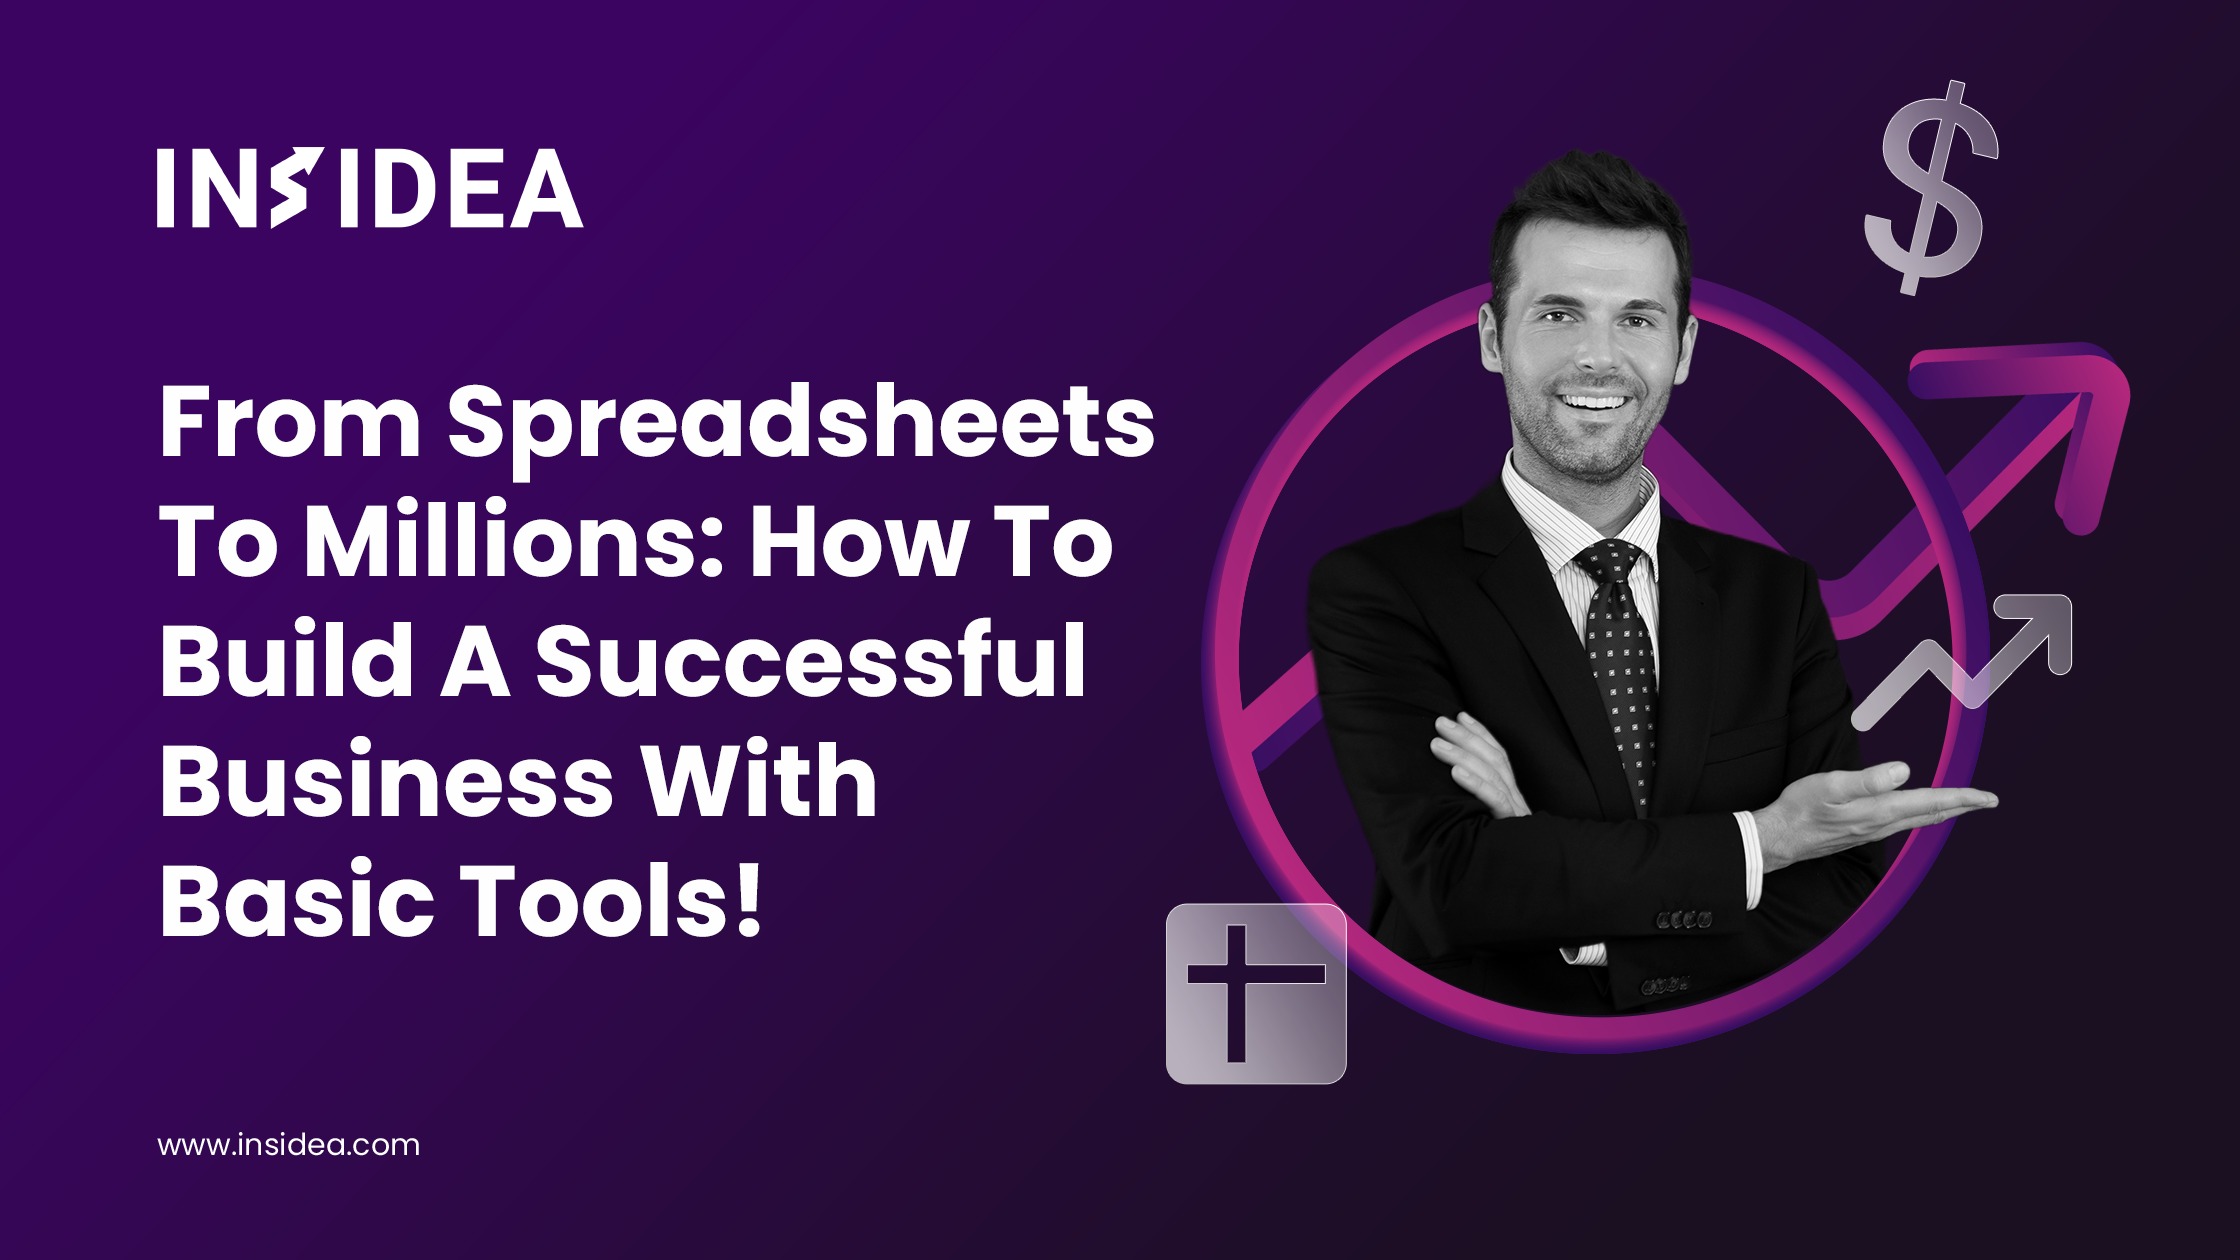 From Spreadsheets To Millions: How To Build A Successful Business With Basic Tools!